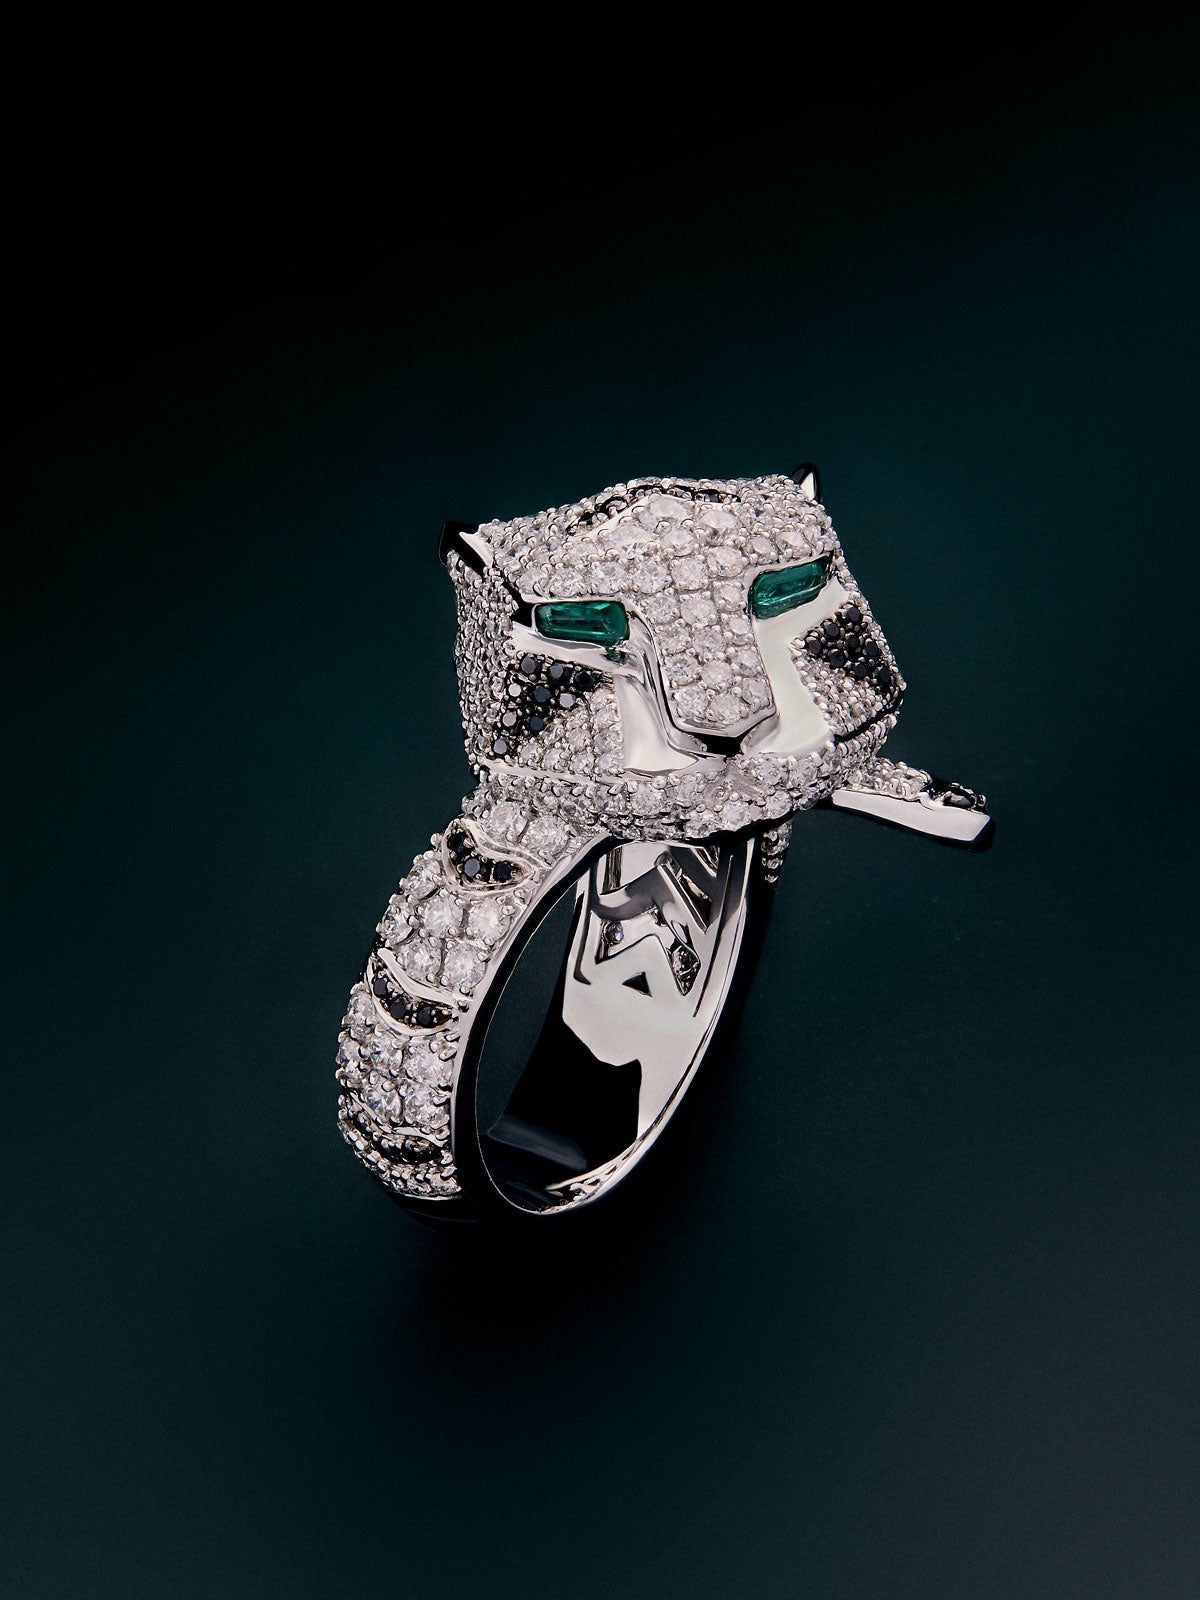 18K white gold ring with brilliant-cut white diamonds of 1.87 cts and black diamonds of 0.25 cts, and trapezoid-cut emeralds of 0.13 cts in the shape of a tiger